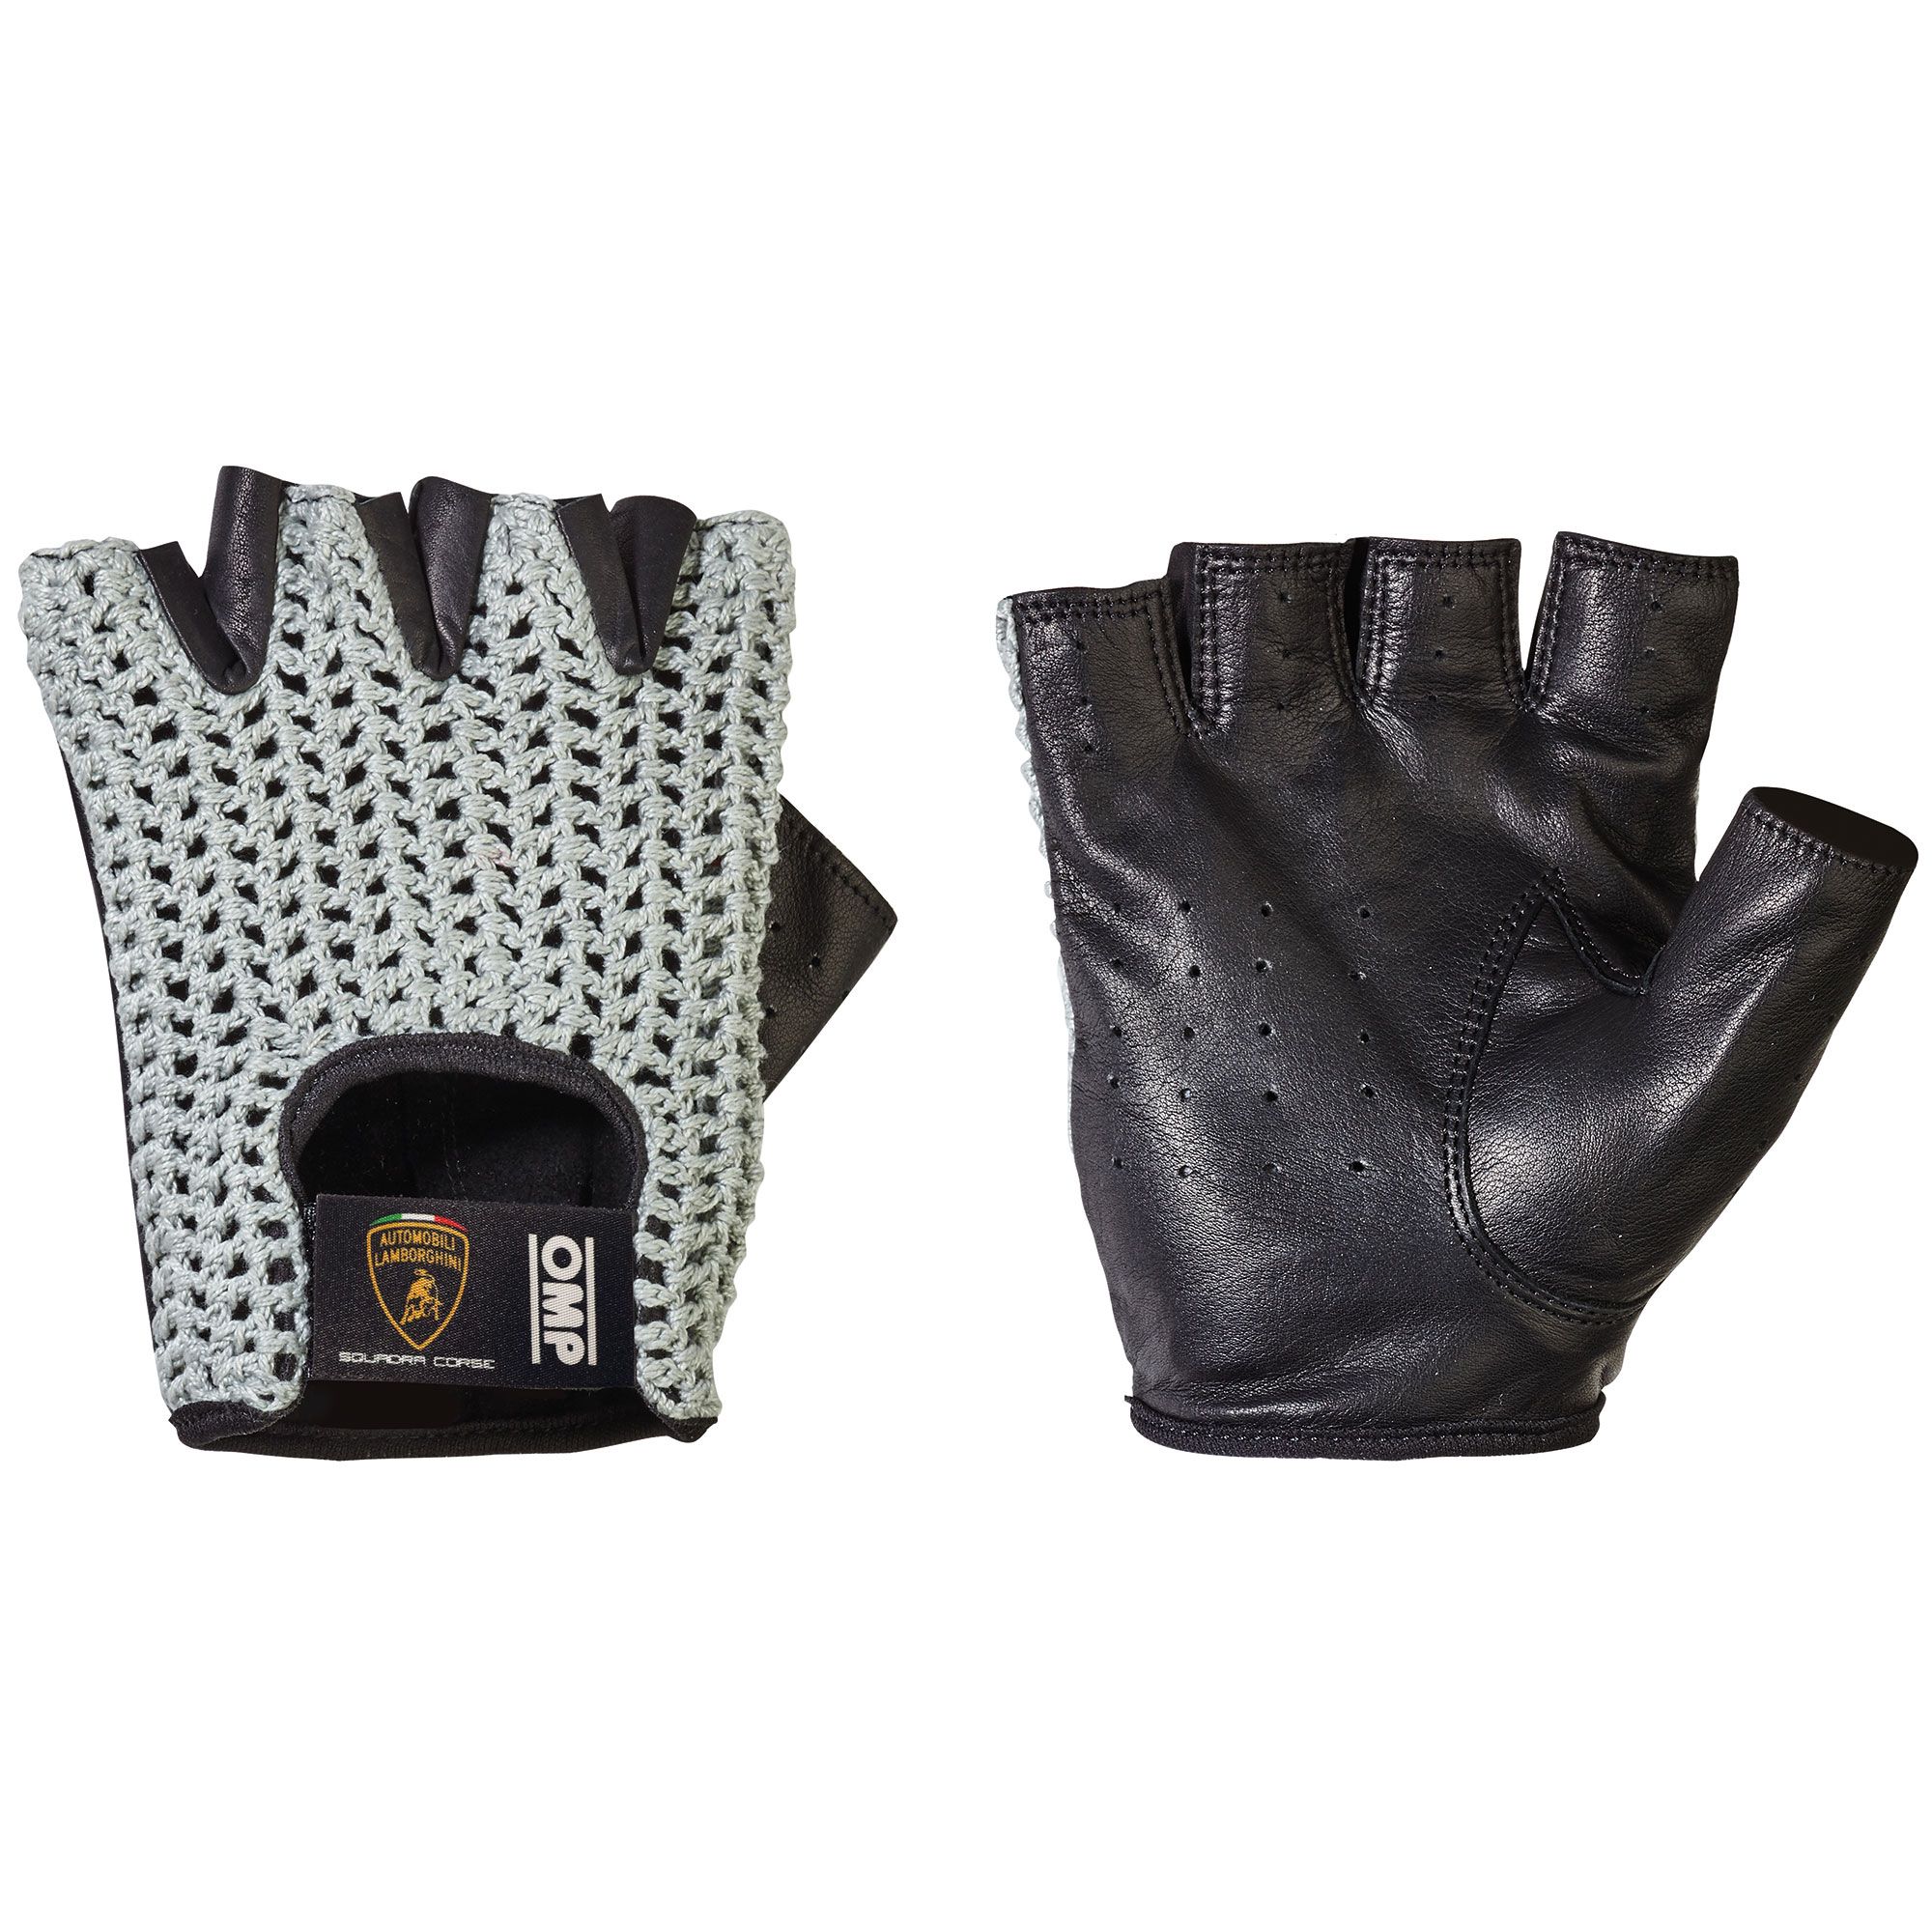 IB/702 OMP NEW RALLY SHORT SUEDE LEATHER DRIVING GLOVES IN 3 COLOURS! 